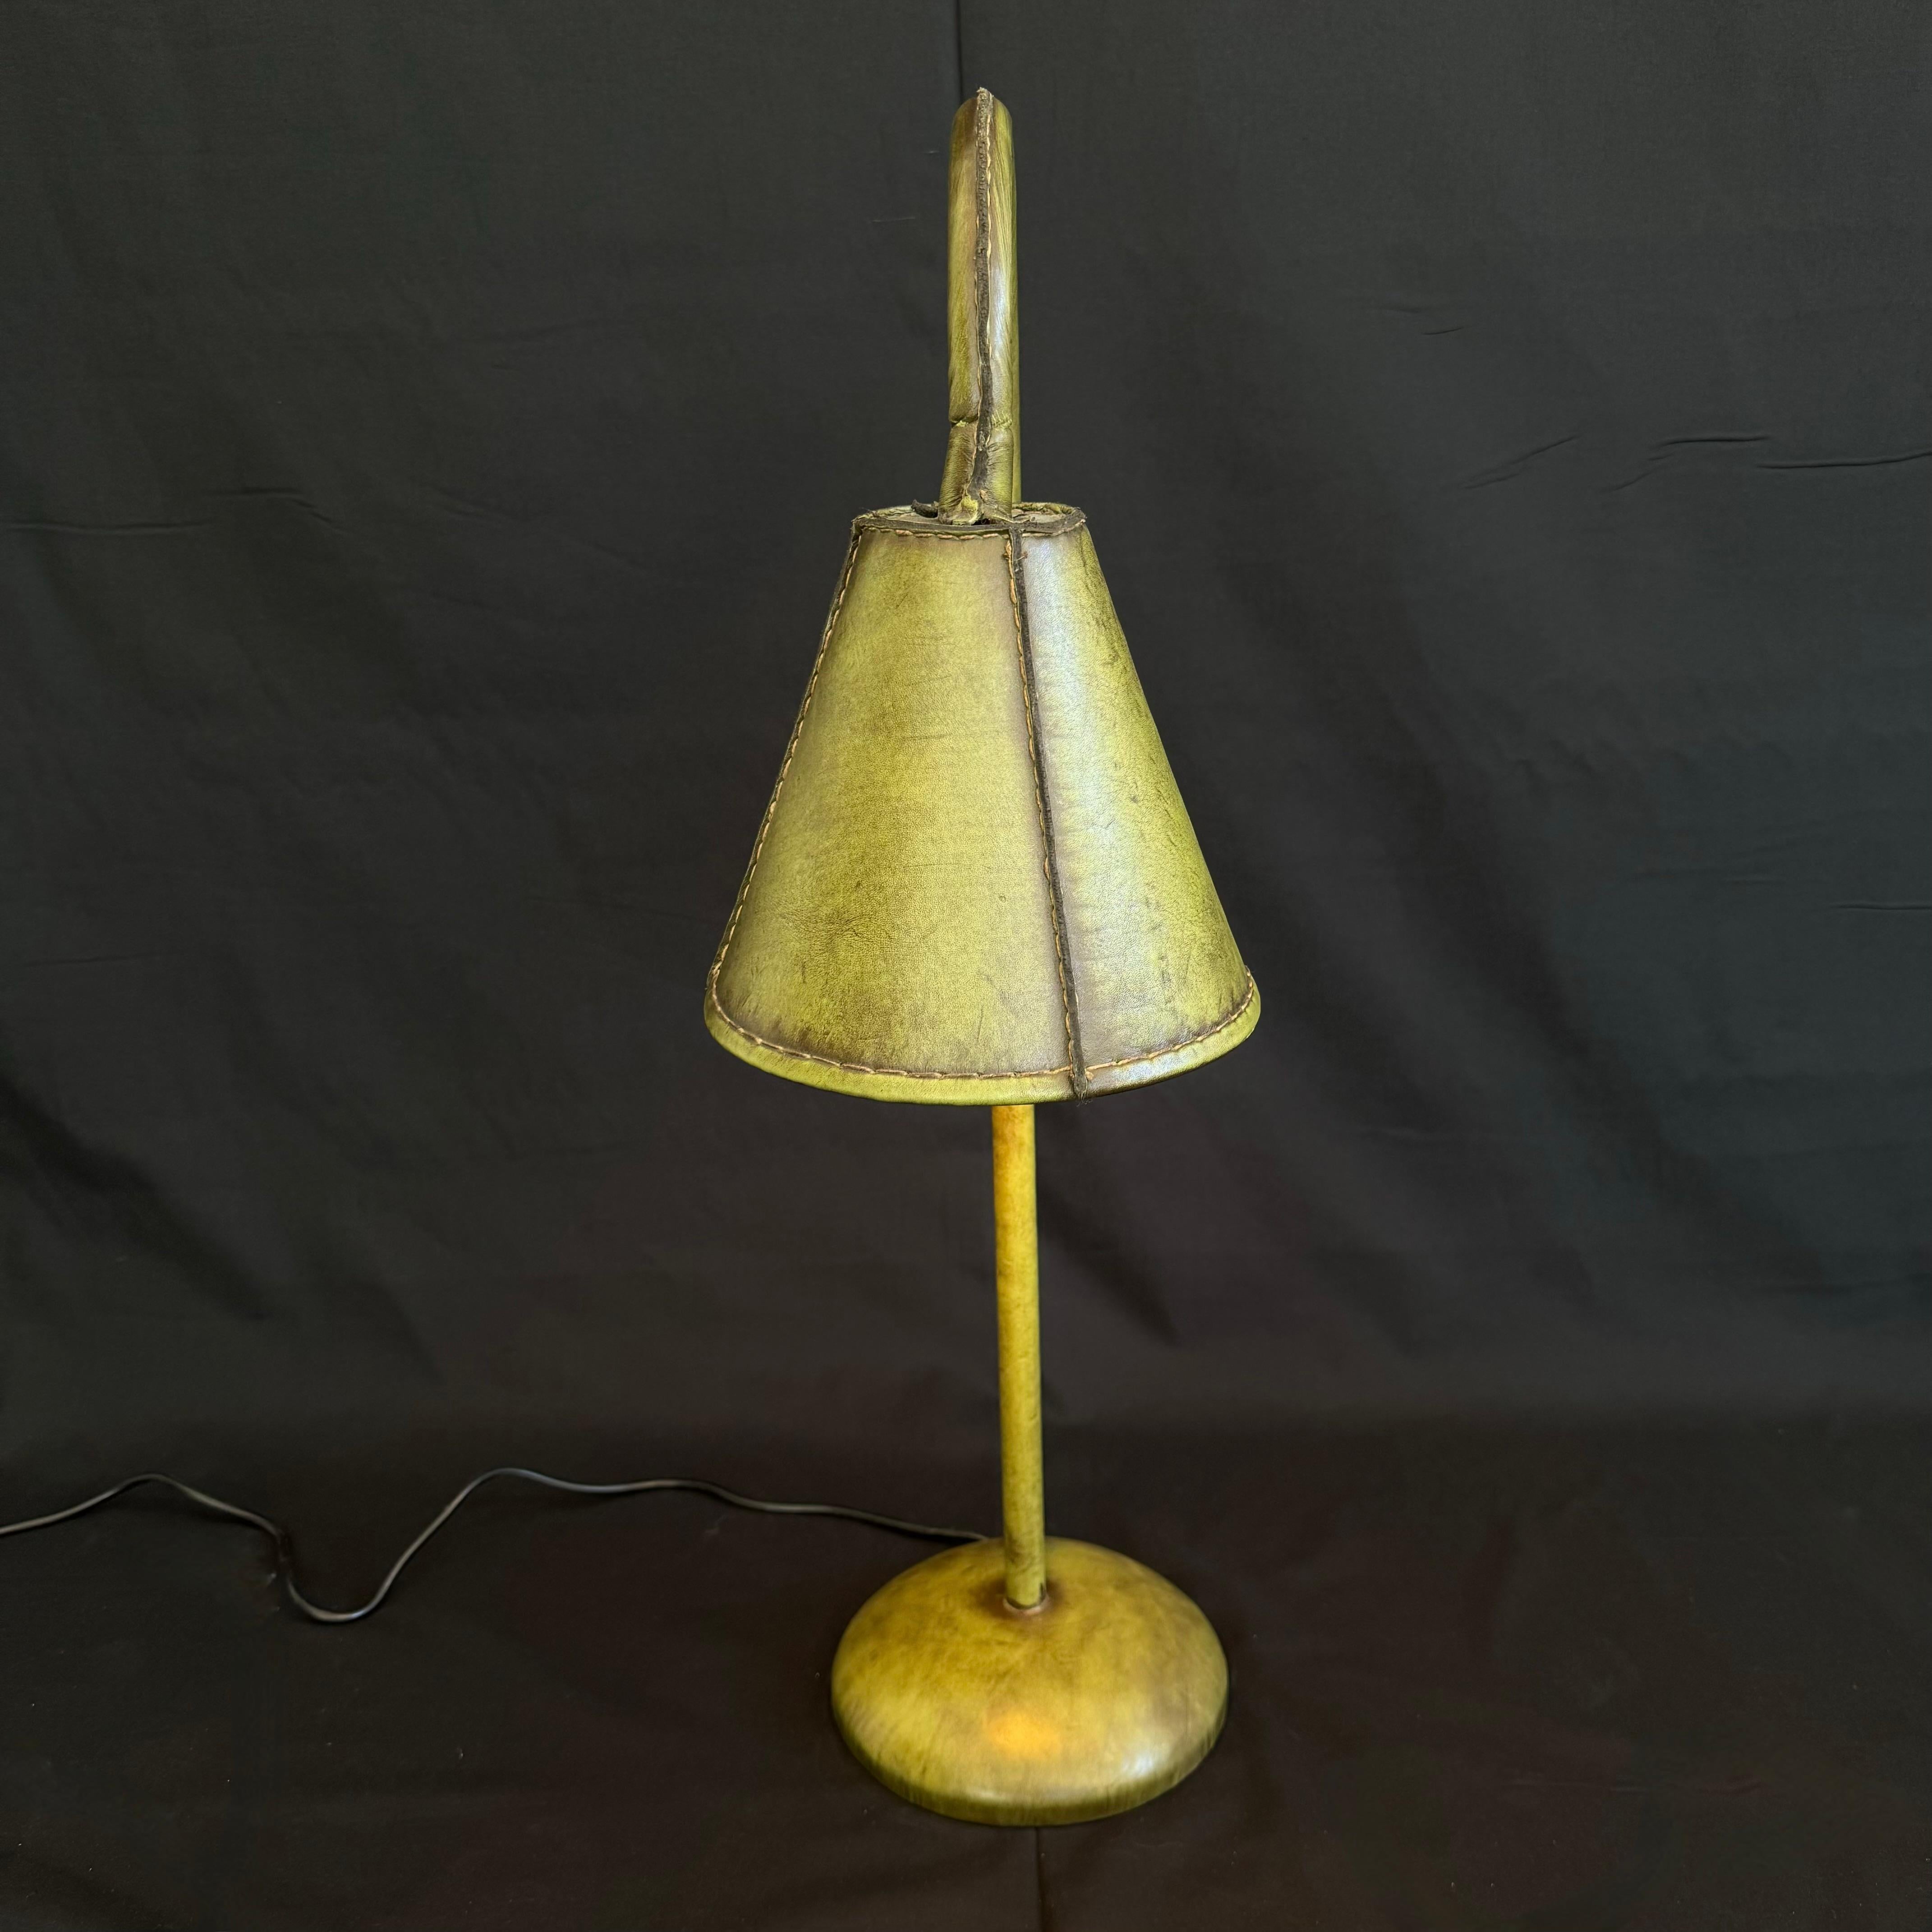 Spanish Green Leather Table Lamp in the Style of Jacques Adnet, 1970s Spain For Sale